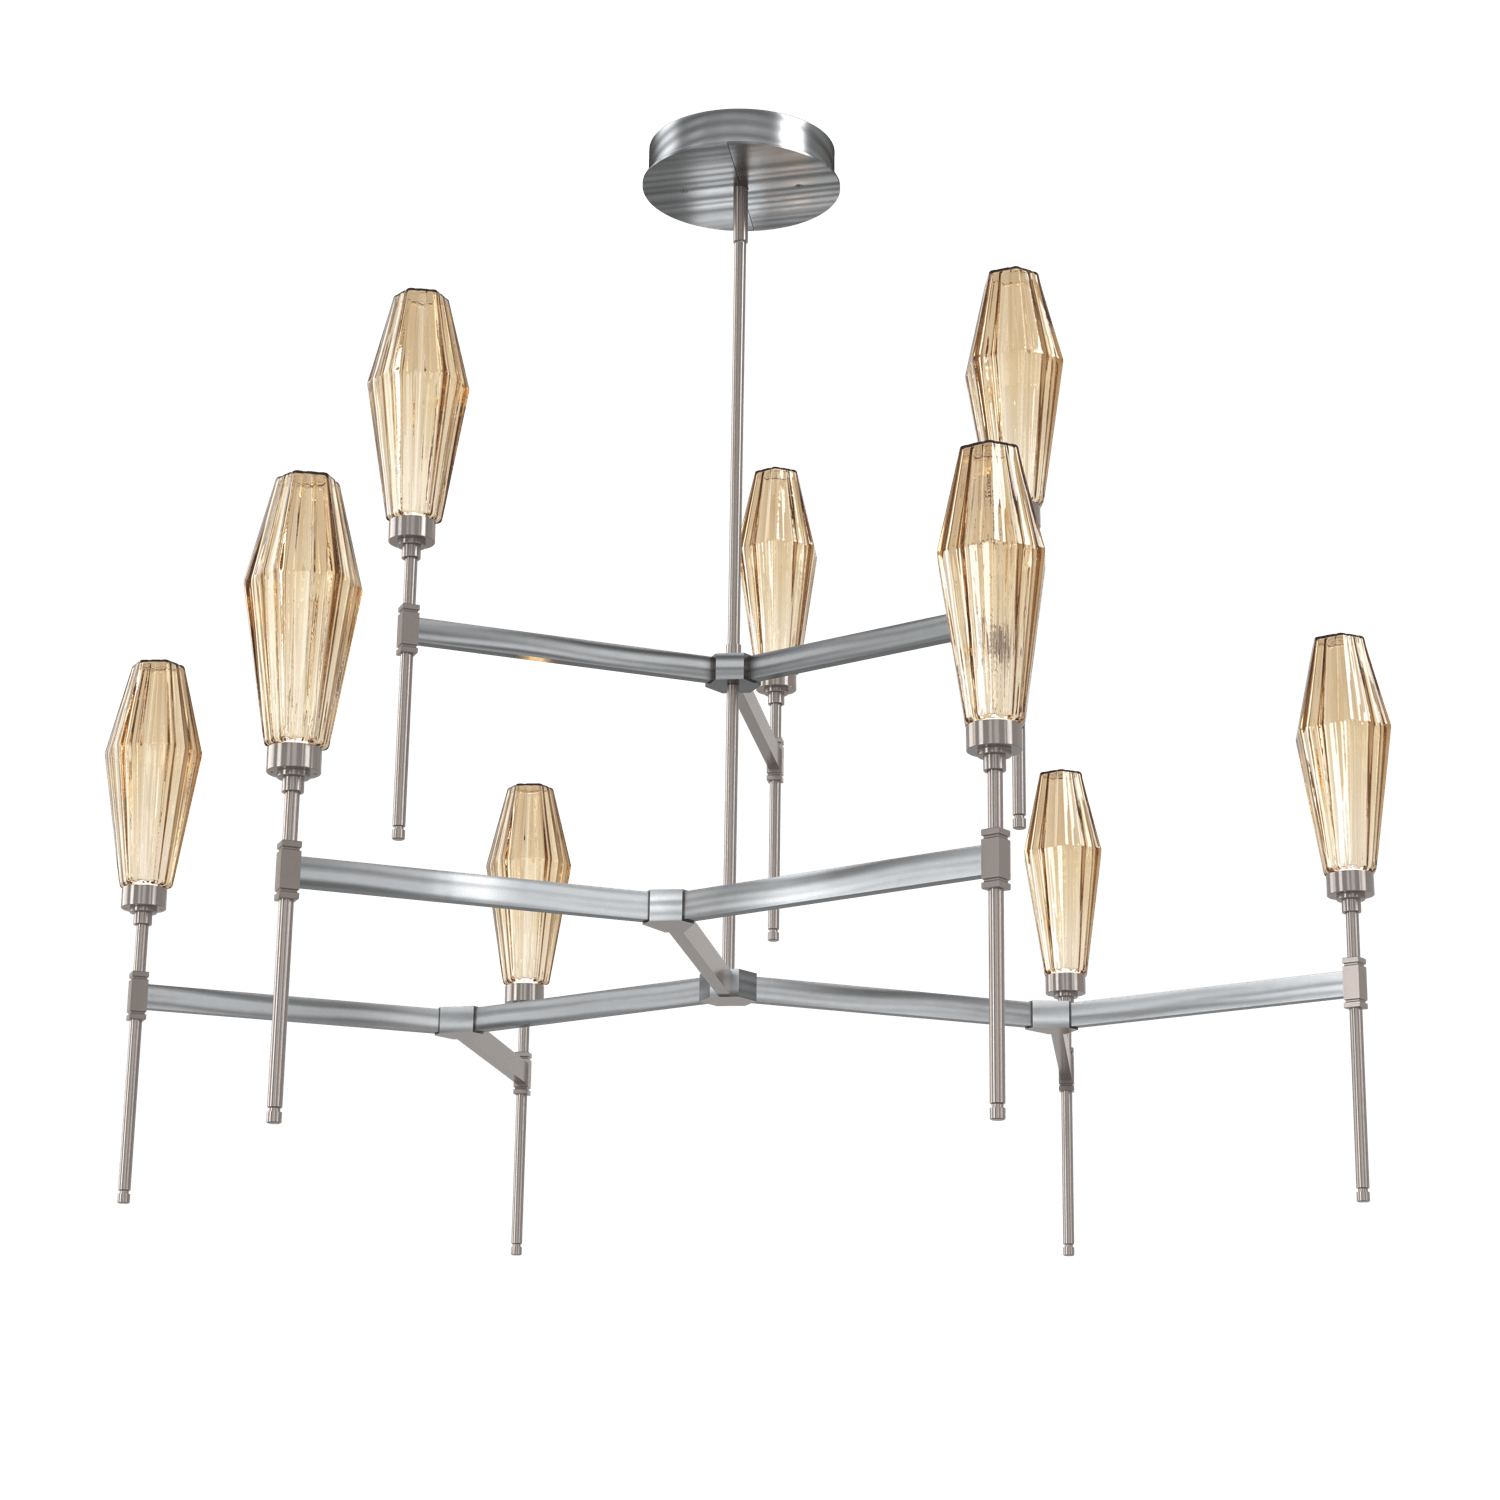 CHB0049-54-GM-RB-Hammerton-Studio-Aalto-54-inch-round-two-tier-belvedere-chandelier-with-gunmetal-finish-and-optic-ribbed-bronze-glass-shades-and-LED-lamping